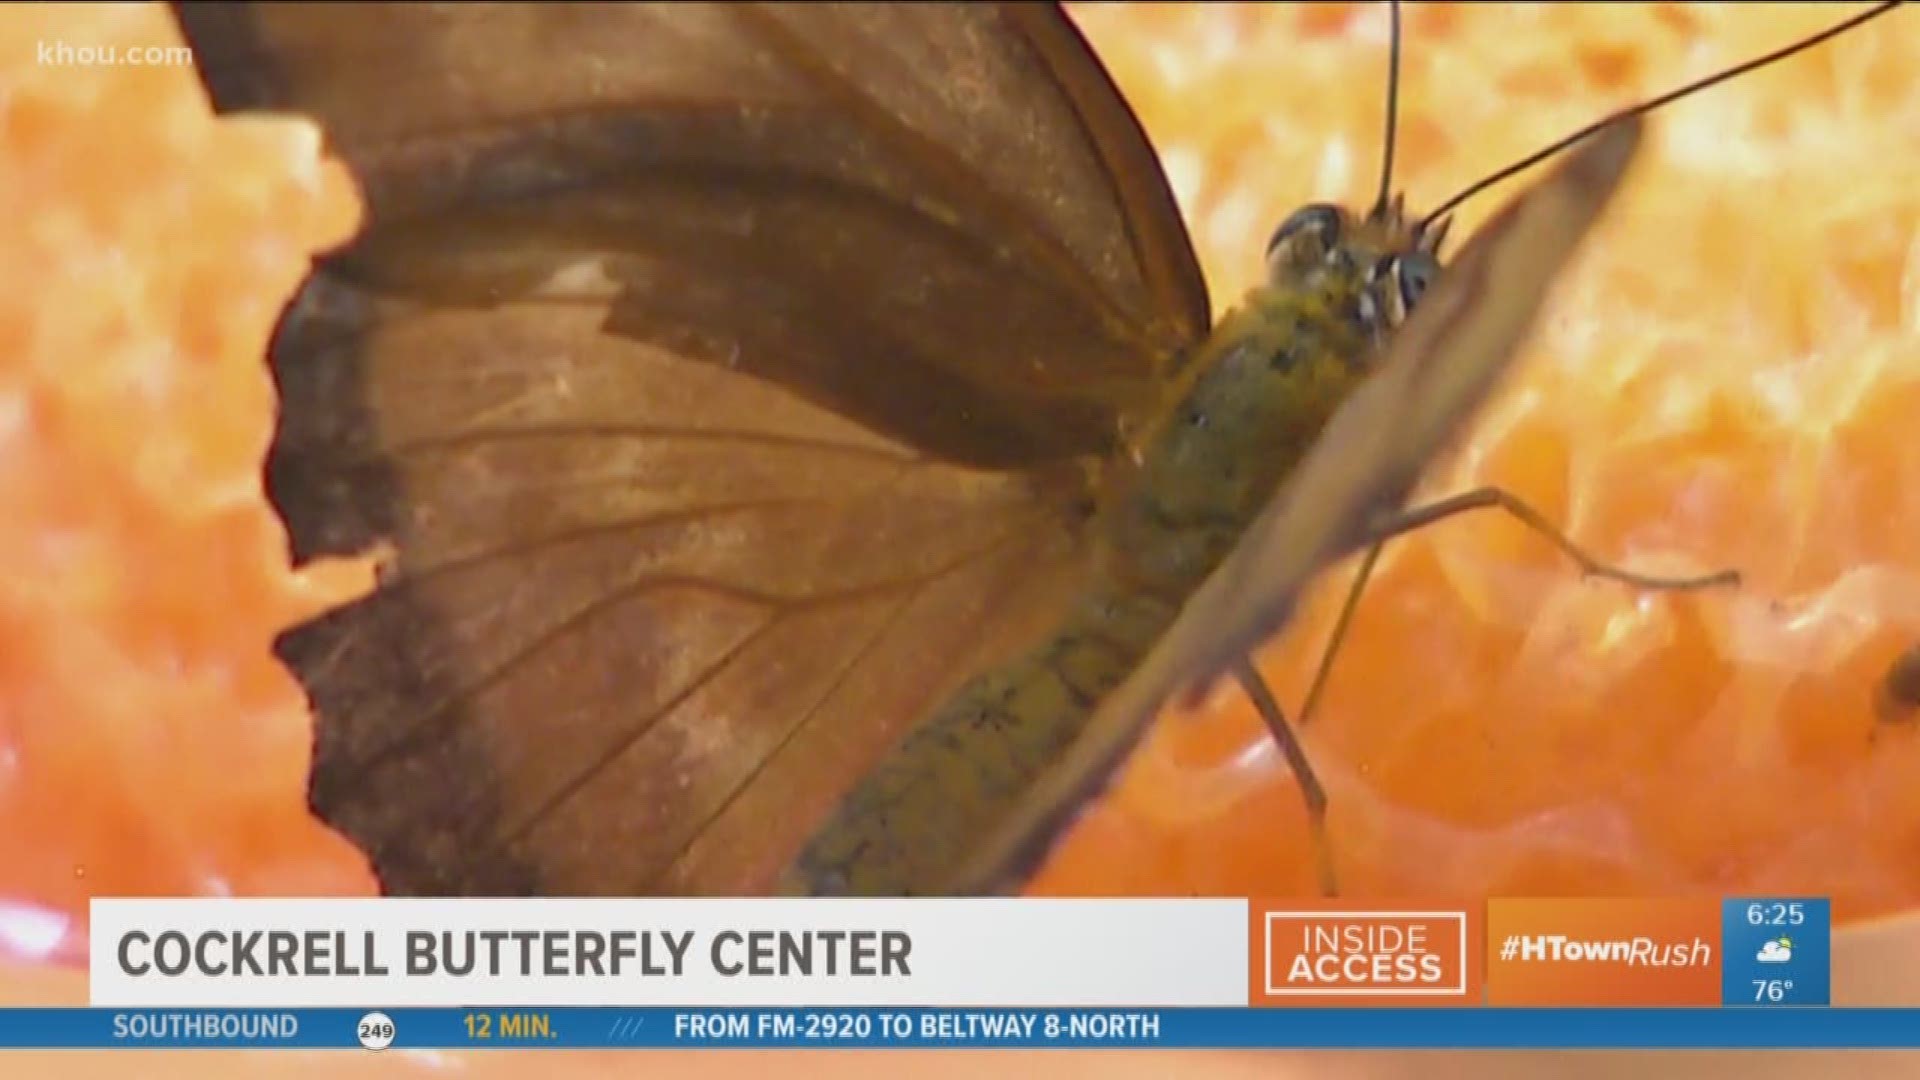 Brandi takes you behind the scenes to show you how HMNS staff help hatch about butterflies a week.